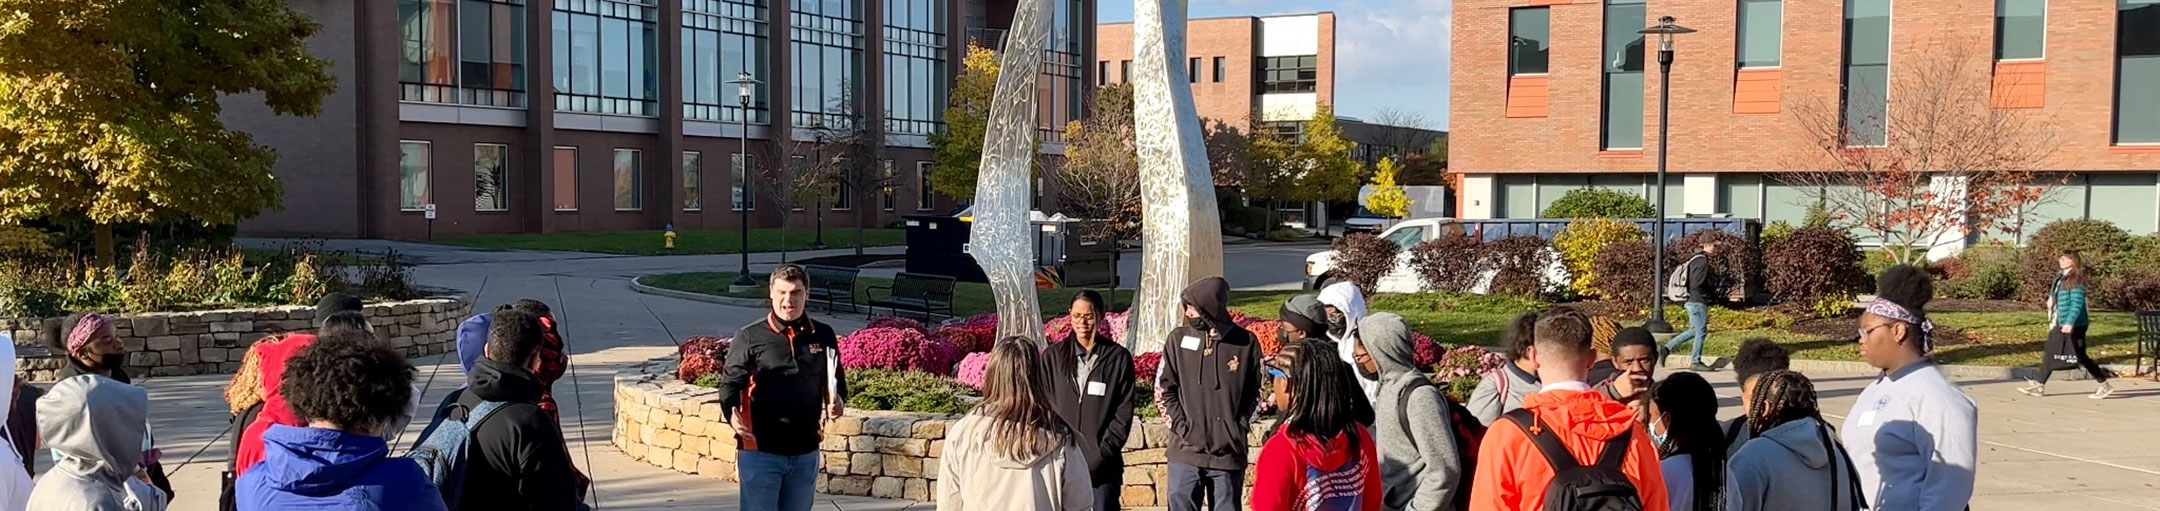 a group of students outside in front of an art sculpture